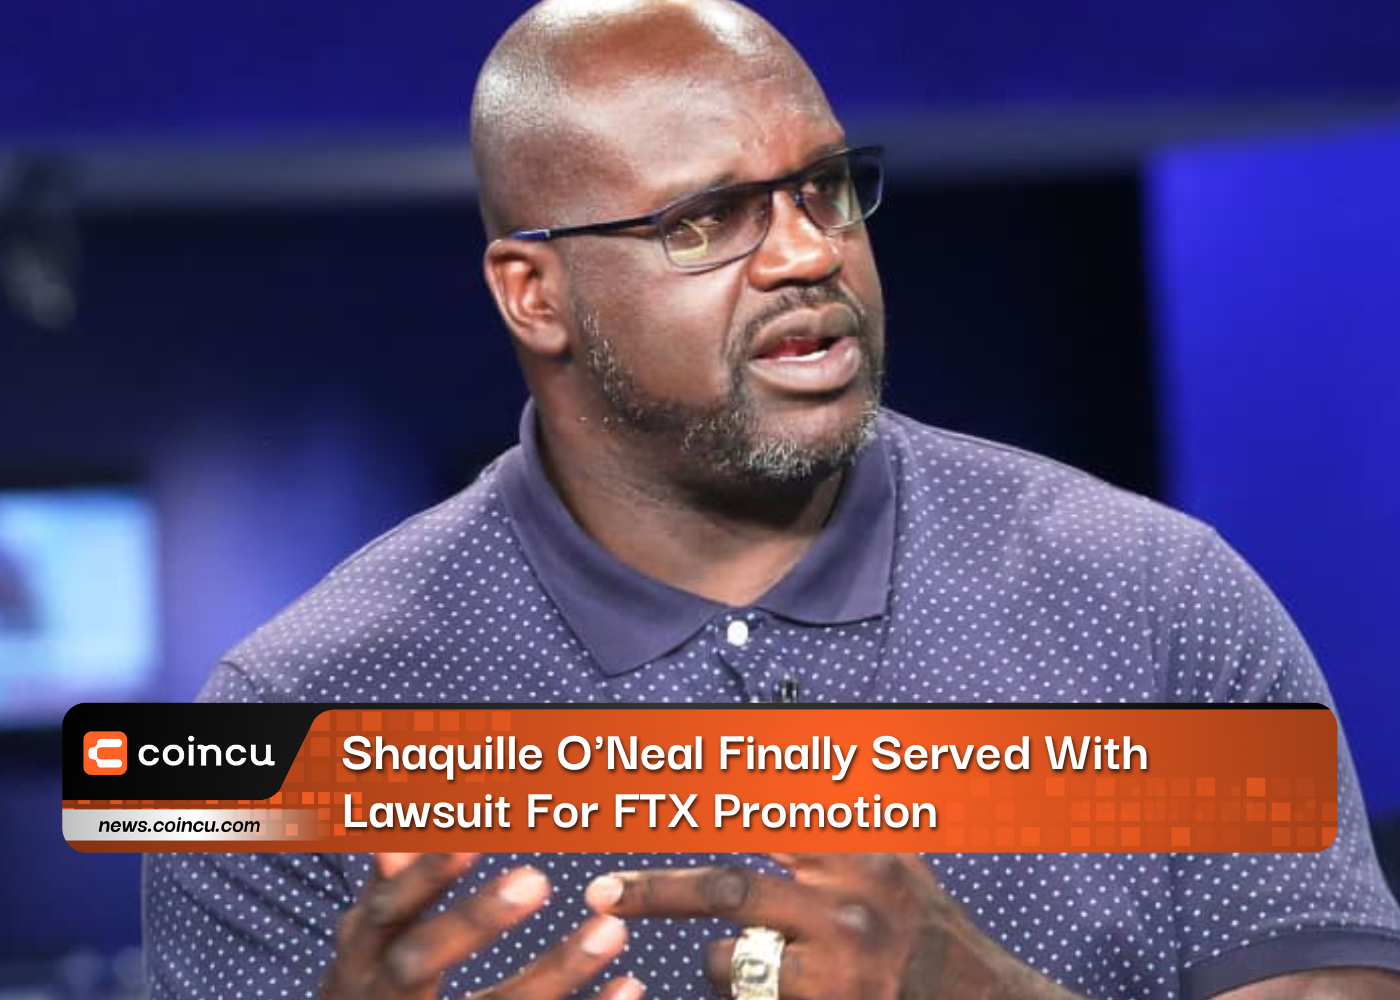 Shaquille O'Neal Finally Served With Lawsuit For FTX Promotion